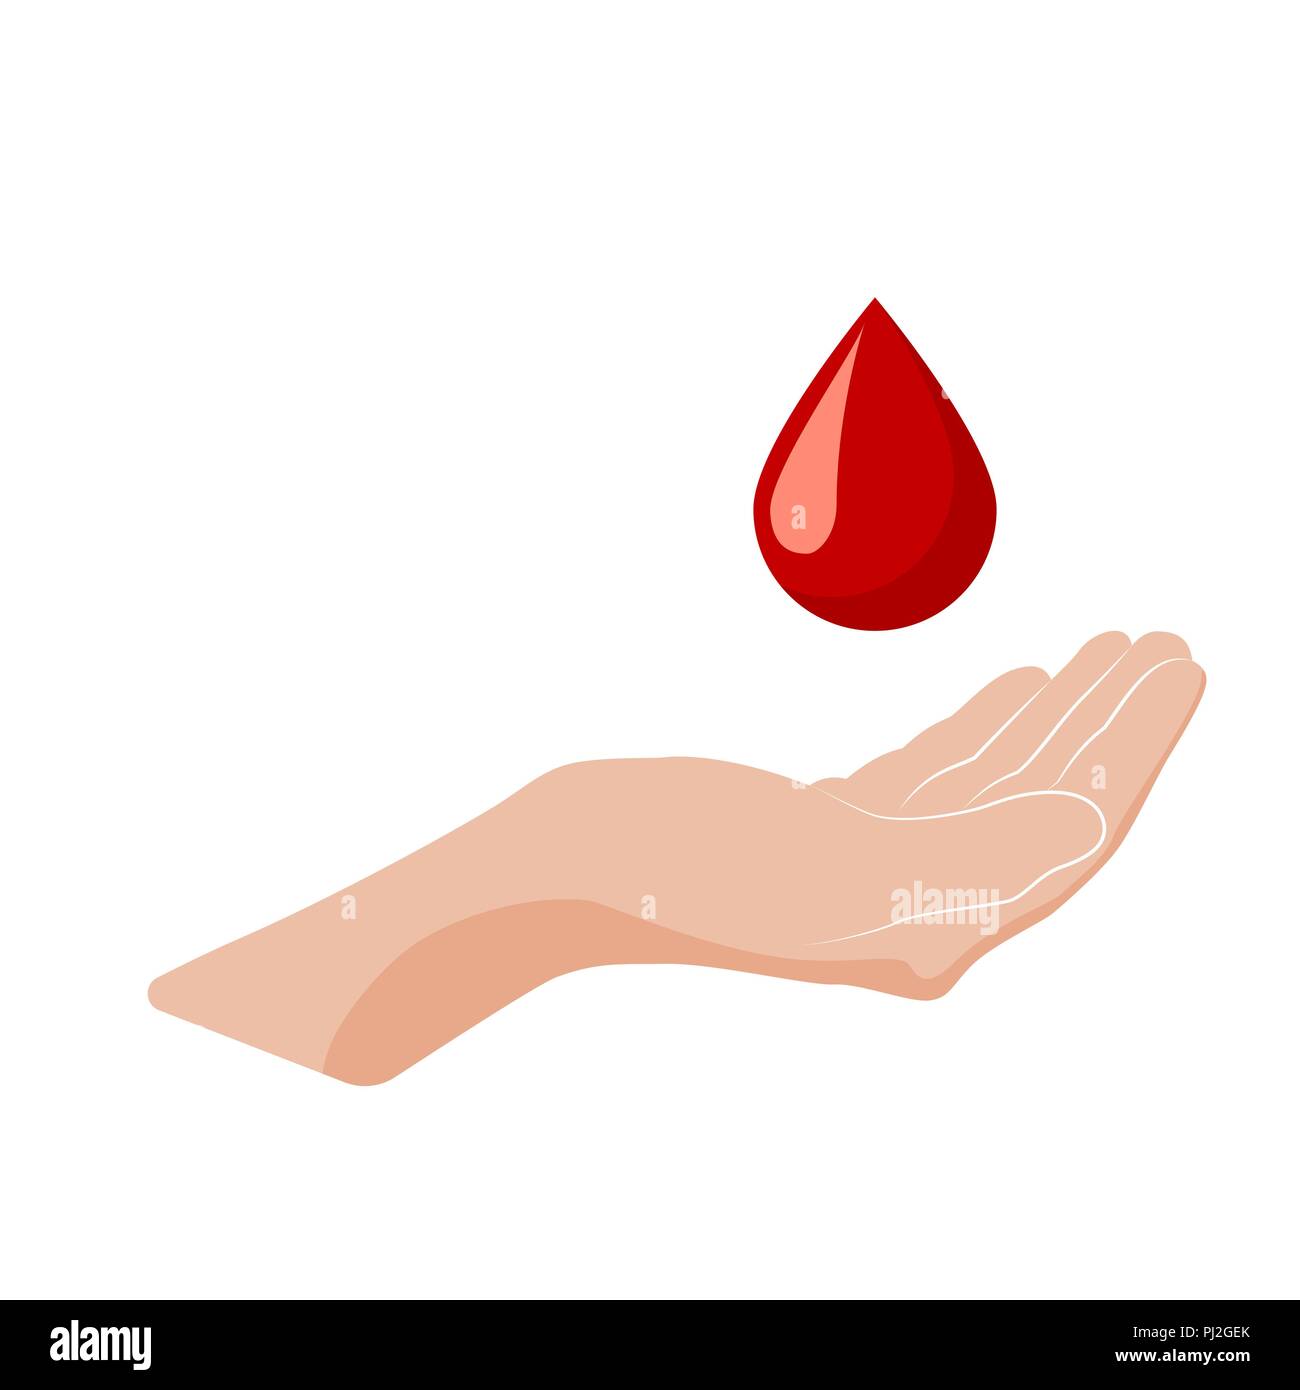 Hand donate blood. World blood donor day concept. Red drop symbol of volunteer blood donation. Vector cartoon illustration isolated on white backgroun Stock Vector